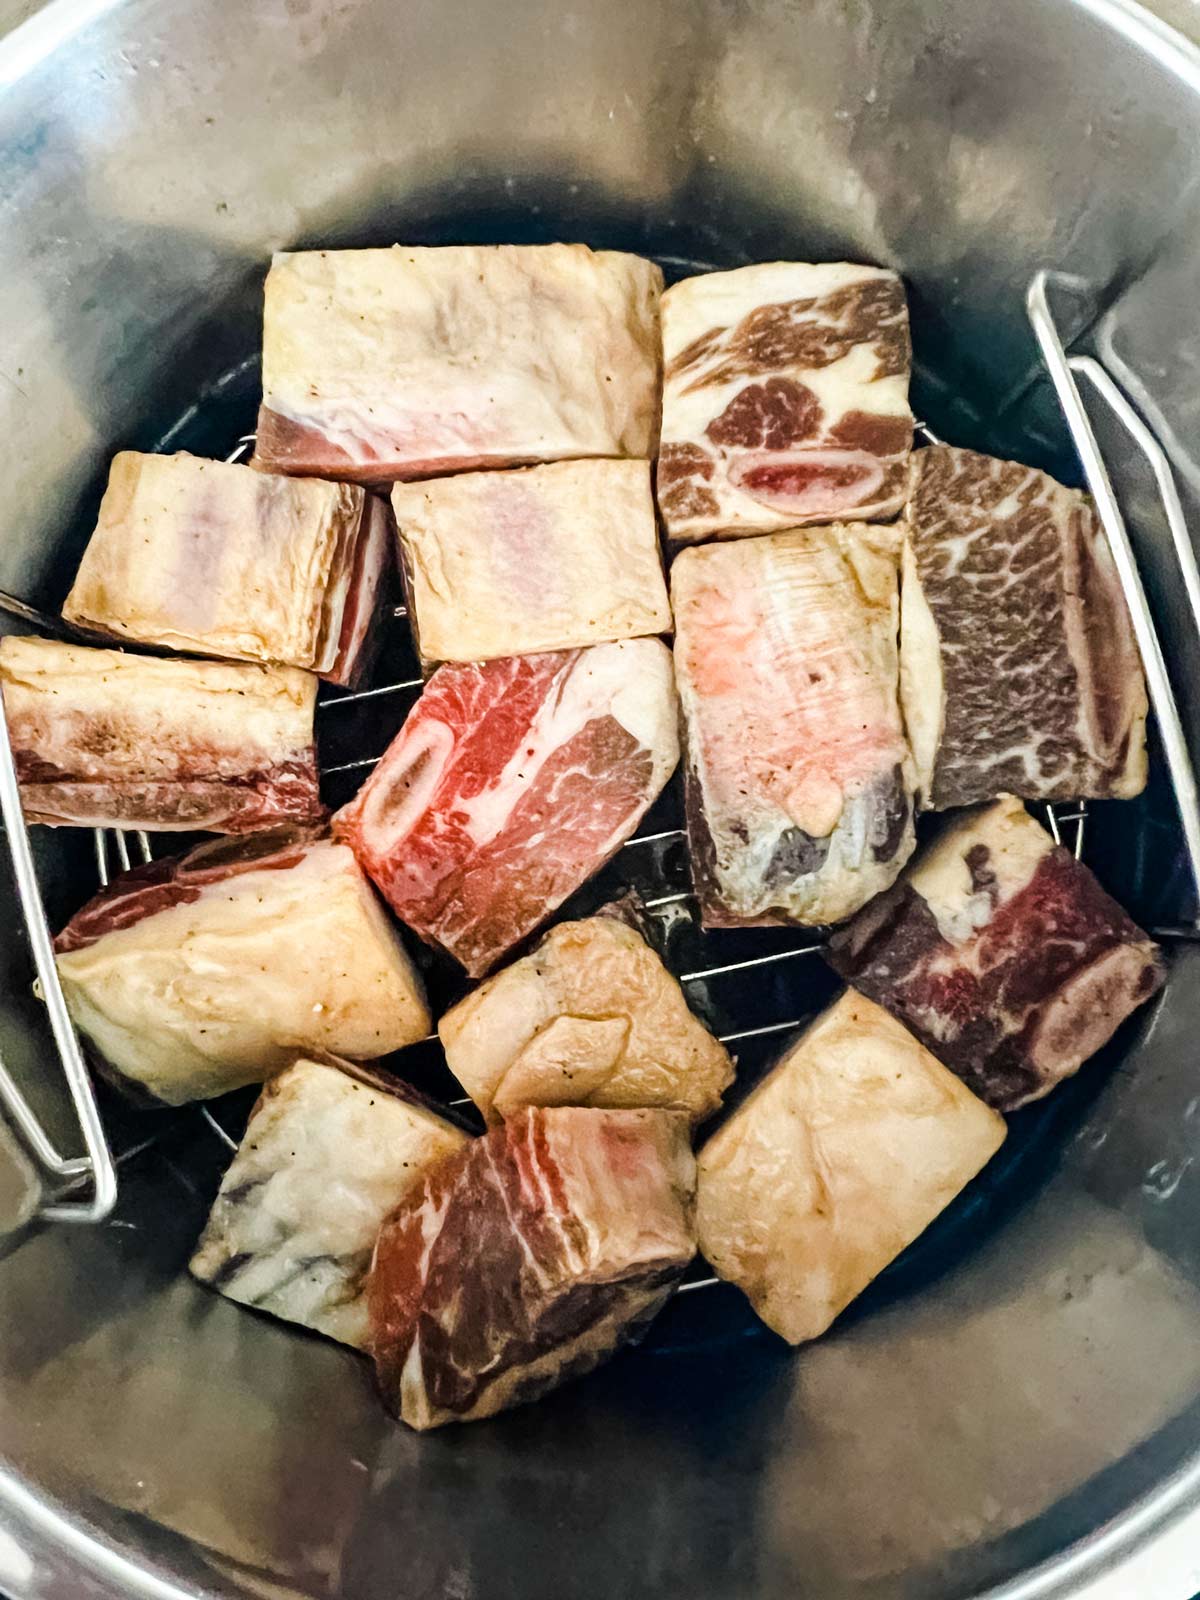 Beef ribs in an Instant Pot ready to cook.